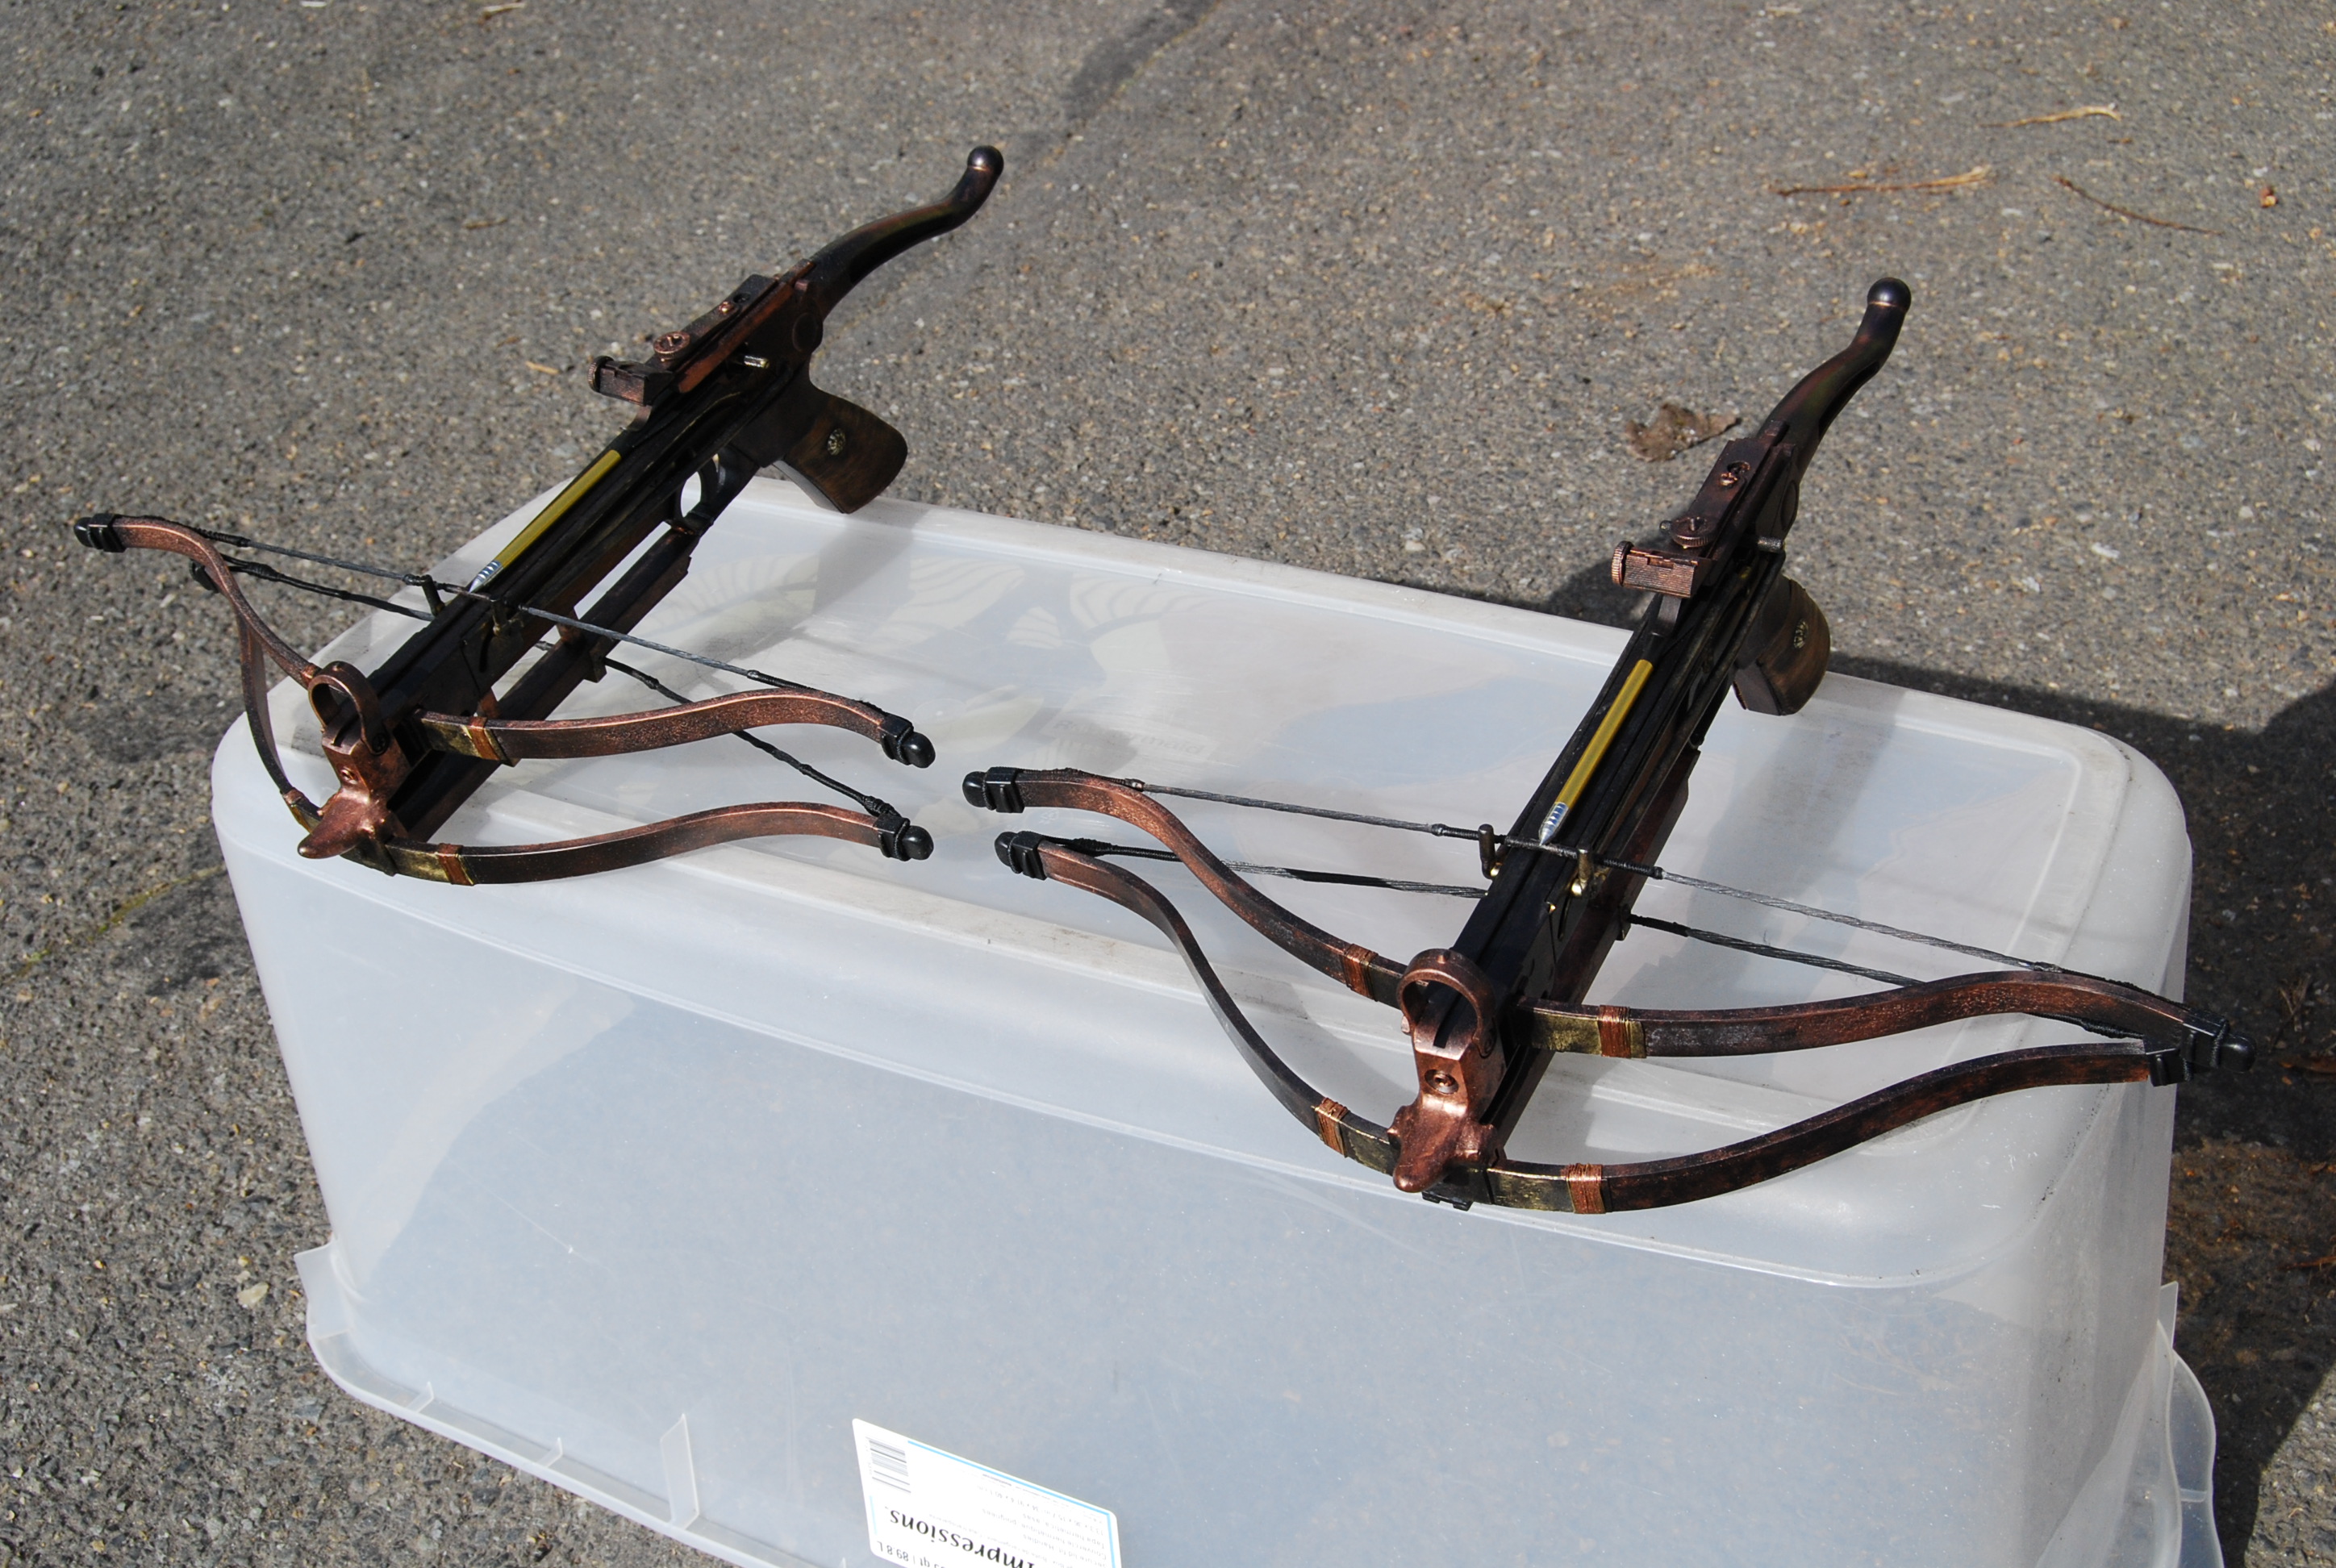 Matching crossbows created for the hit NBC television series - Grimm.